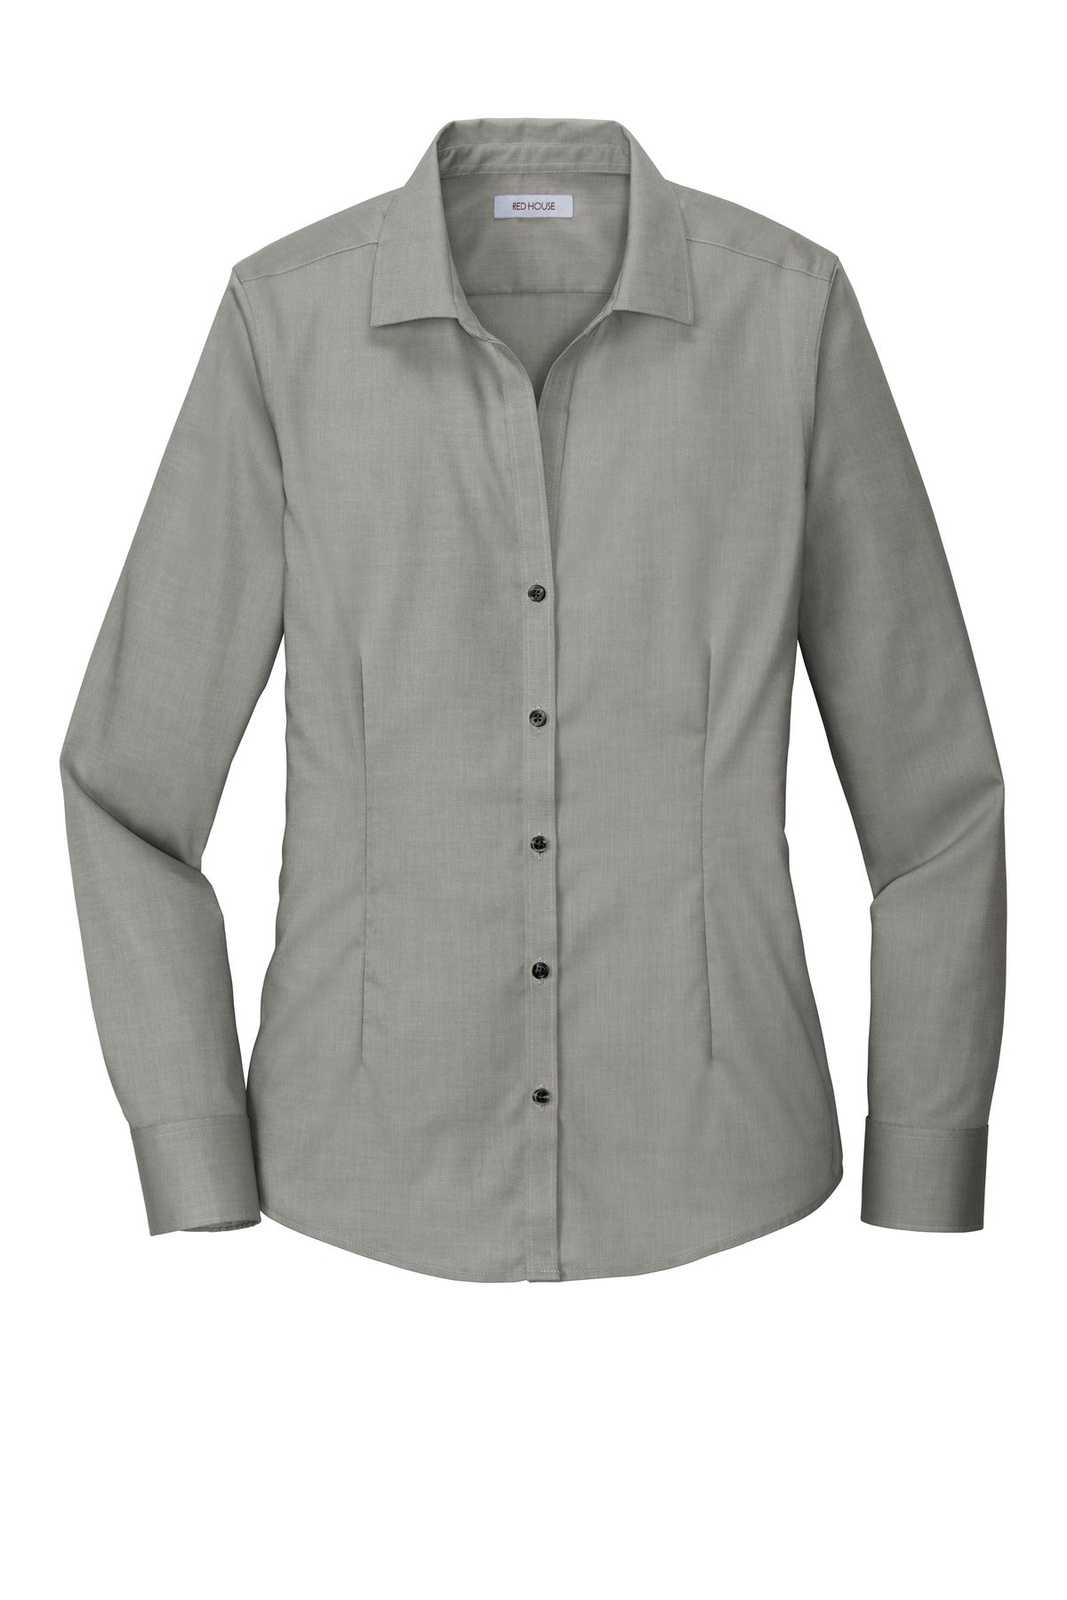 Red House RH250 Ladies Pinpoint Oxford Non-Iron Shirt - Charcoal - HIT a Double - 5